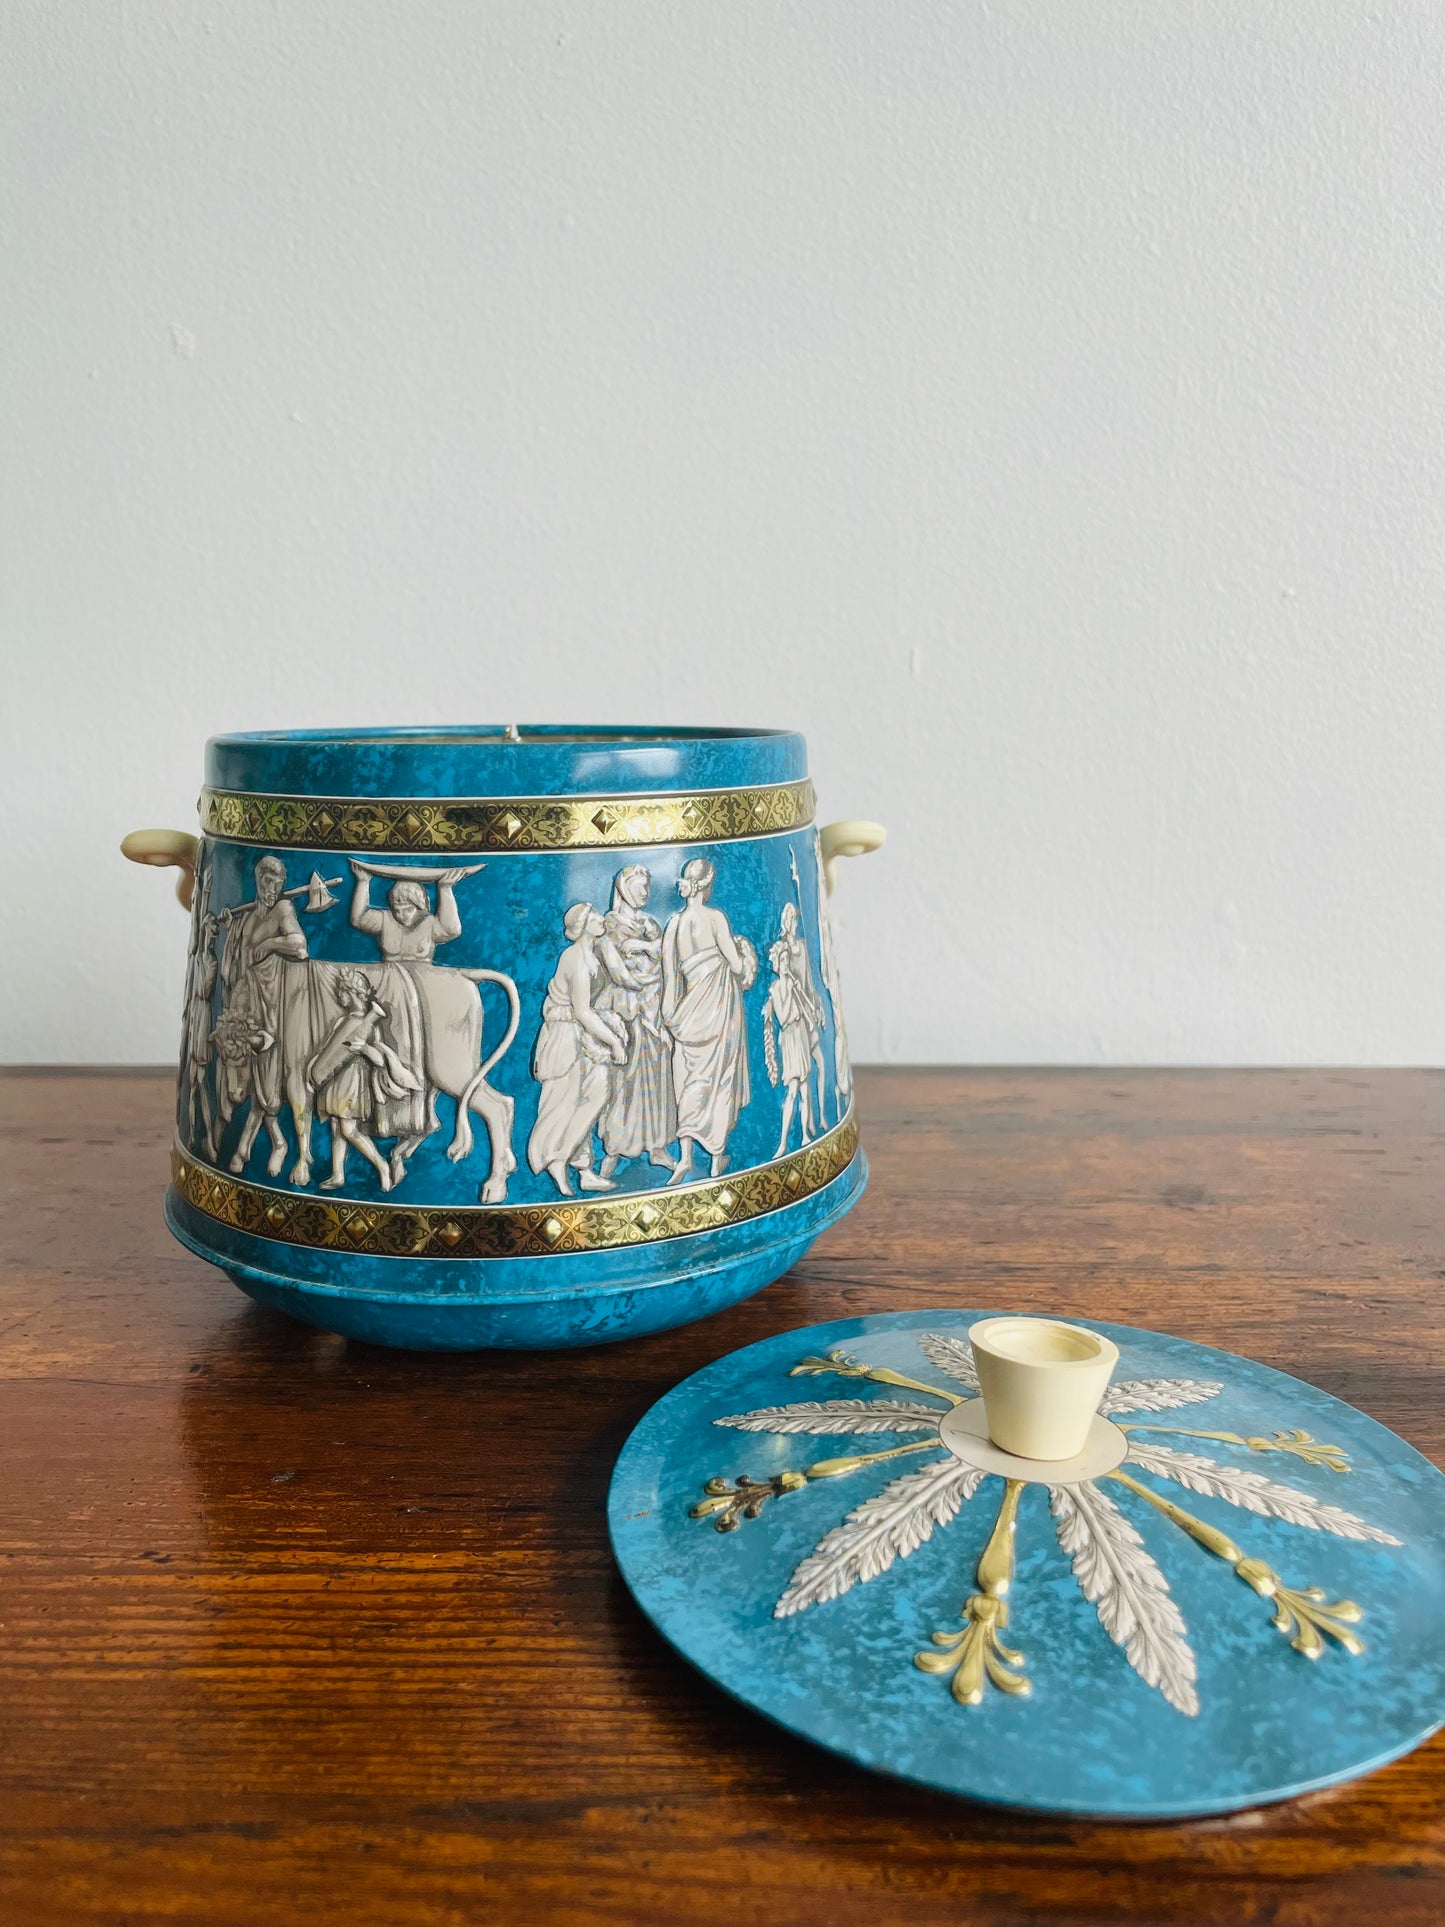 Vintage Blue Tin with Lid & Handle in a Grecian Design - Great Storage for Tea!